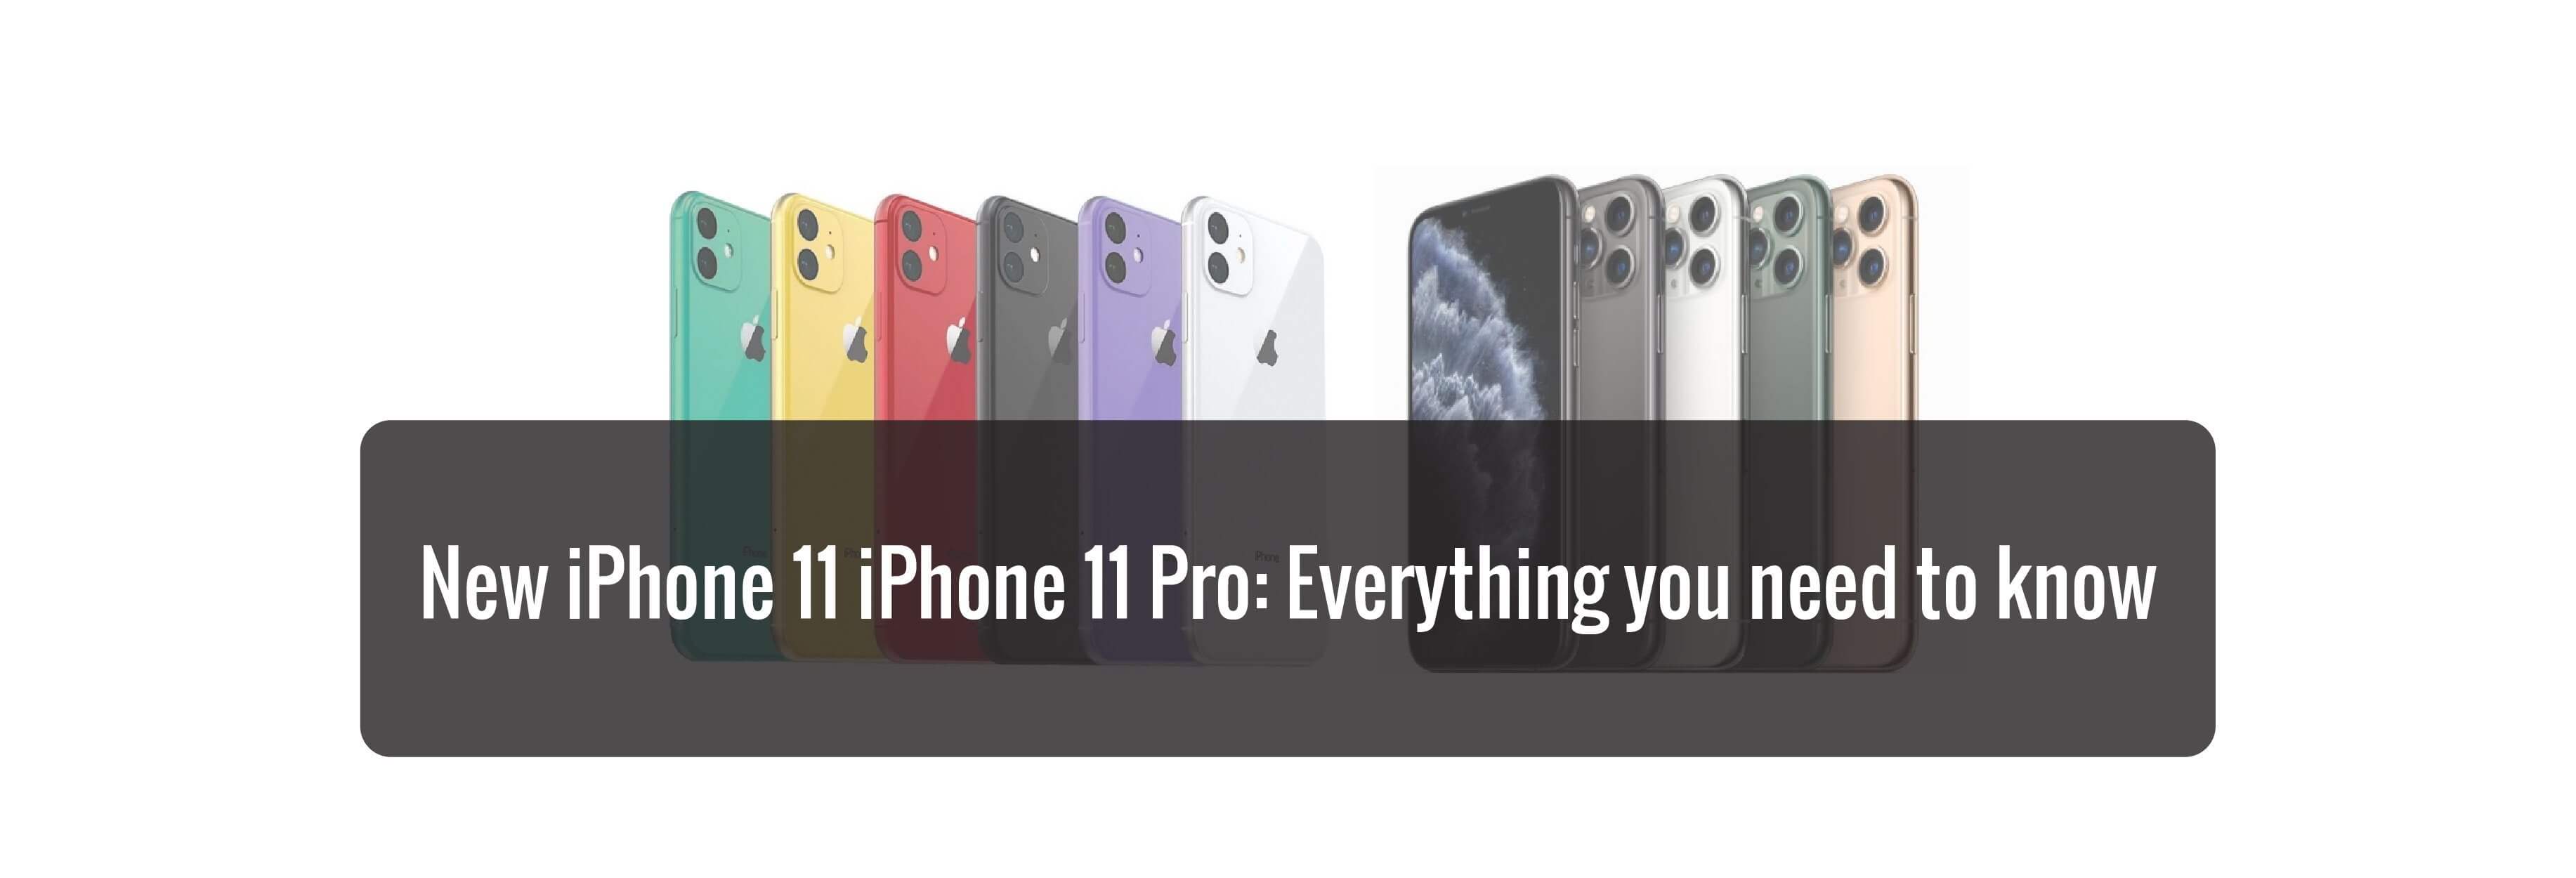 New iPhone 11 iPhone 11 Pro: Everything you need to know